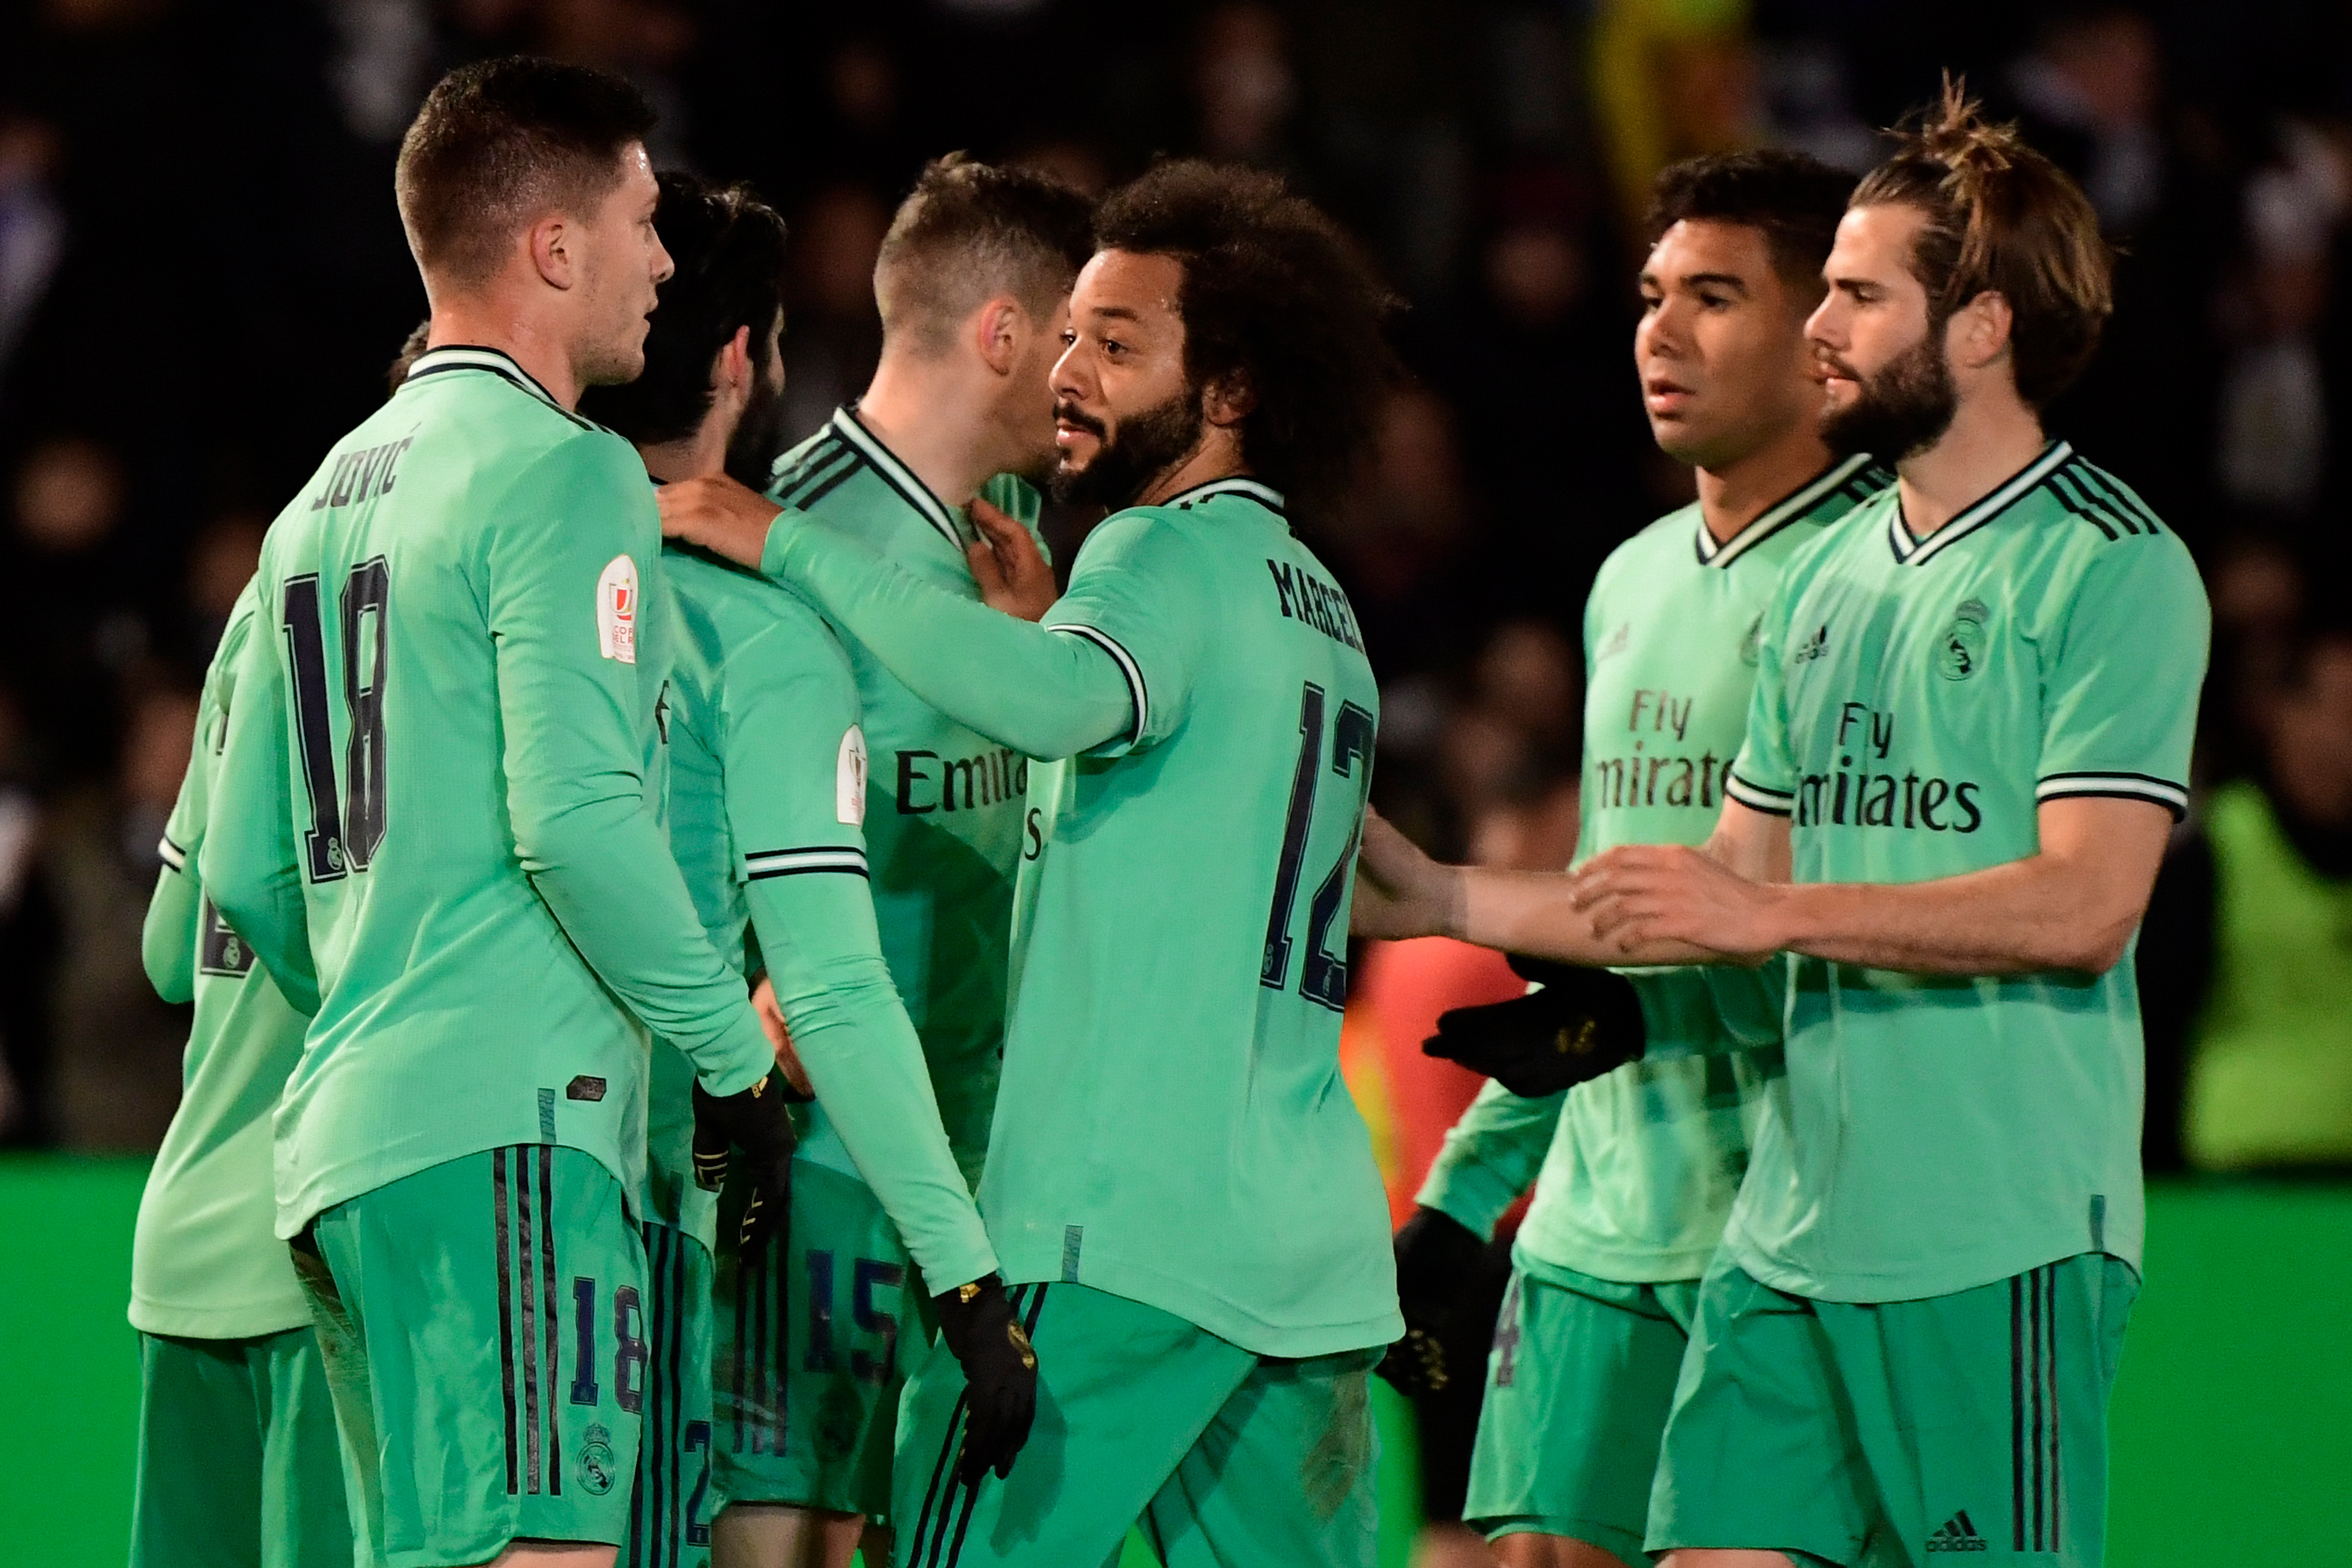 Real Madrid's players celebrate Spanish midfielder Brahim Diaz's goal during the Copa del Rey (King's Cup) football match between Unionistas de Salamanca CF and Real Madrid CF at Las Pistas del Helmantico stadium in Salamanca, on January 22, 2020. (Photo by JAVIER SORIANO / AFP) (Photo by JAVIER SORIANO/AFP via Getty Images)